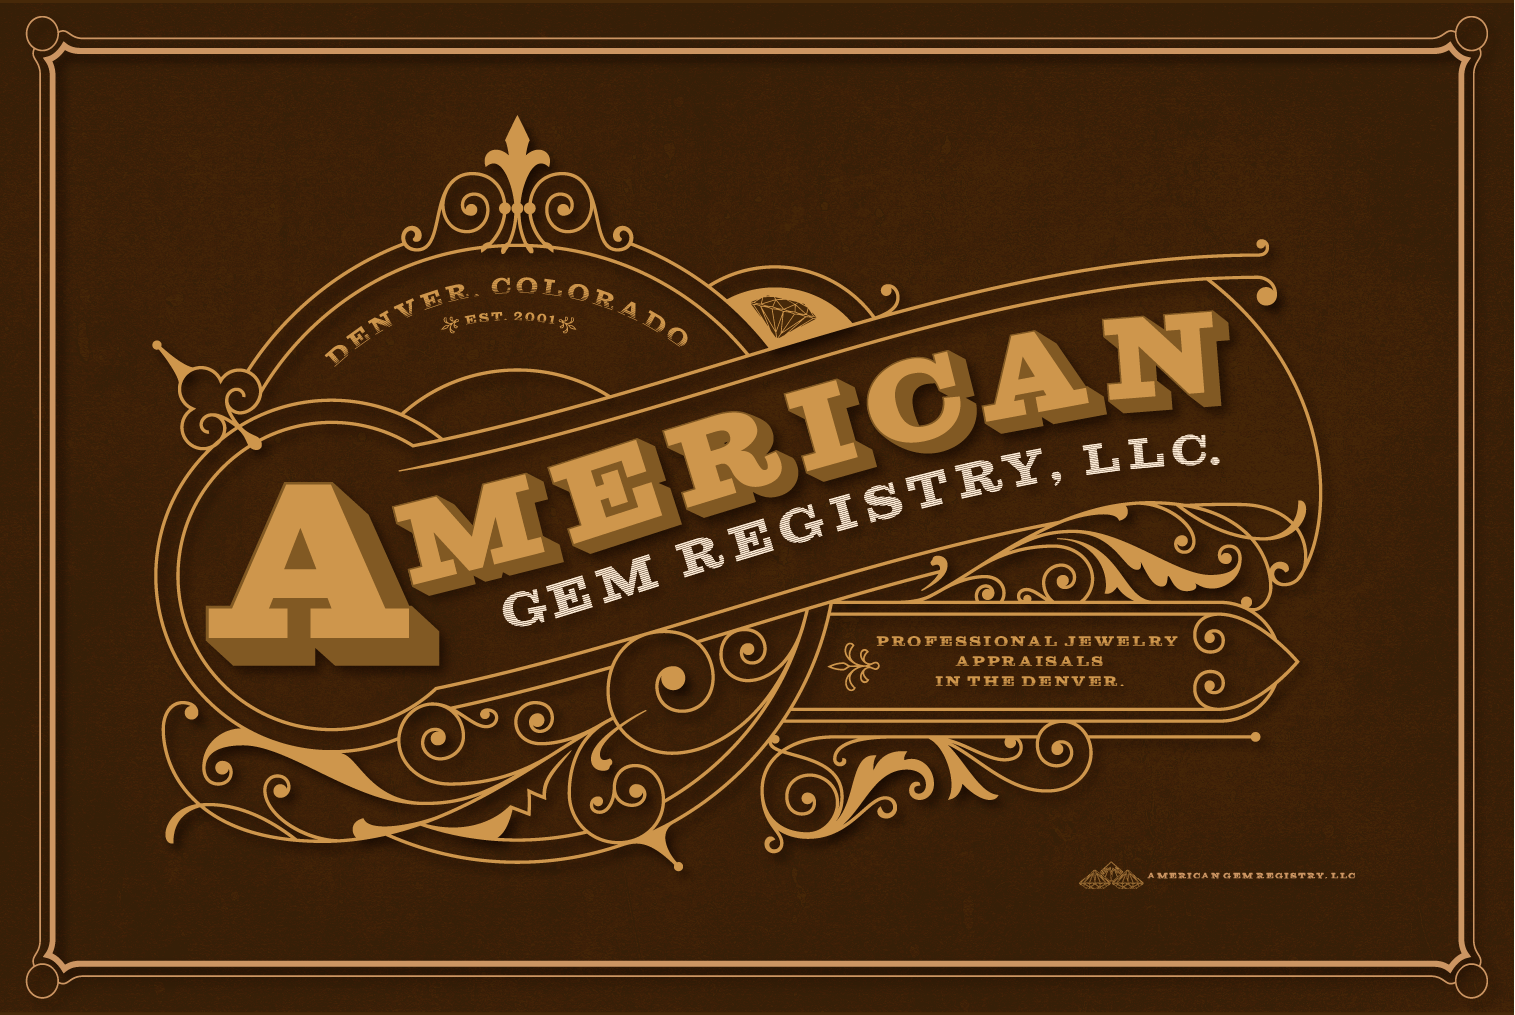 The American Gem Registry's Marquee Logo designed by ThinkTank.